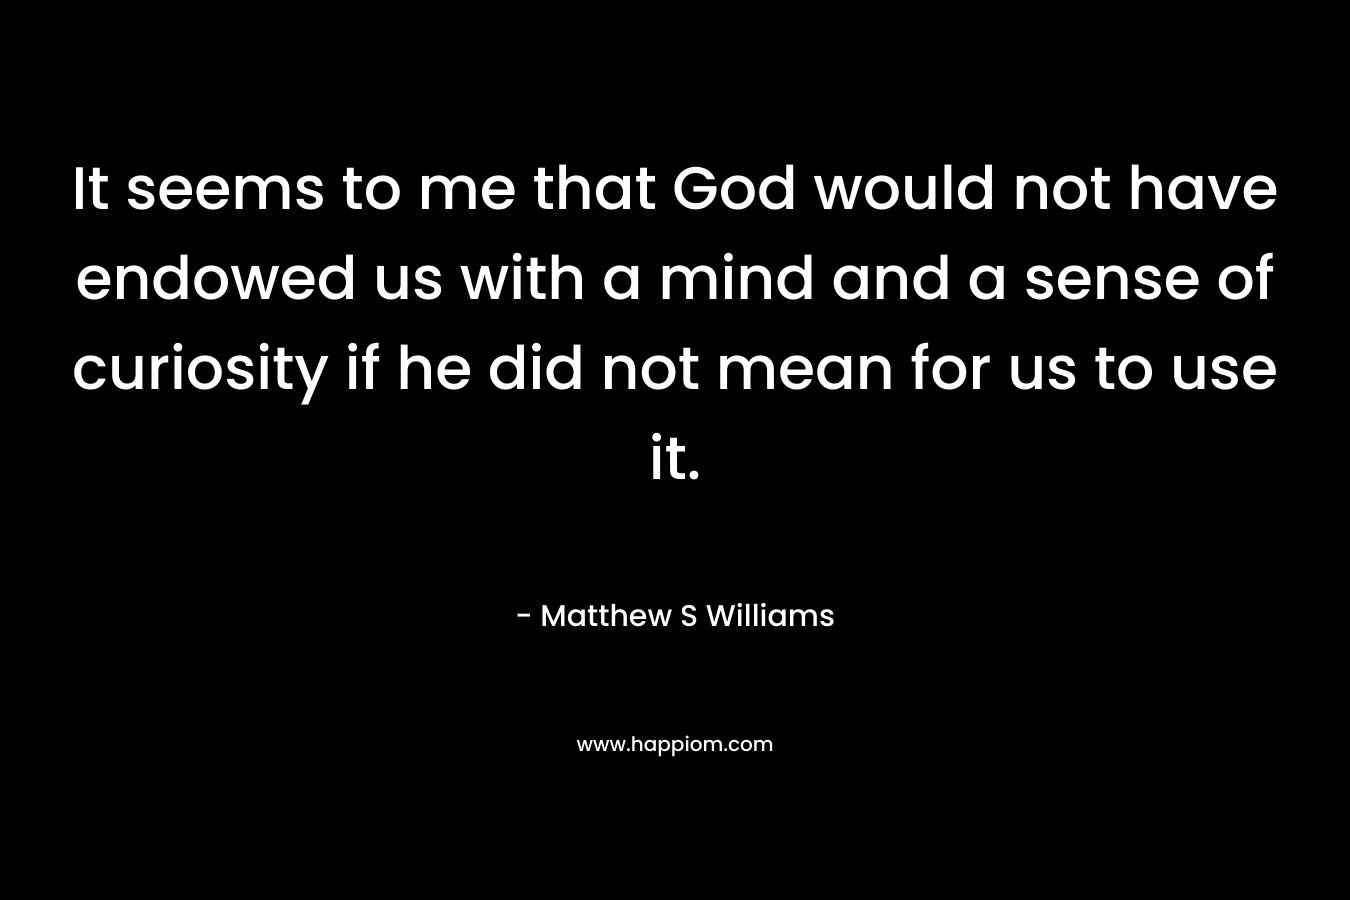 It seems to me that God would not have endowed us with a mind and a sense of curiosity if he did not mean for us to use it. – Matthew S Williams